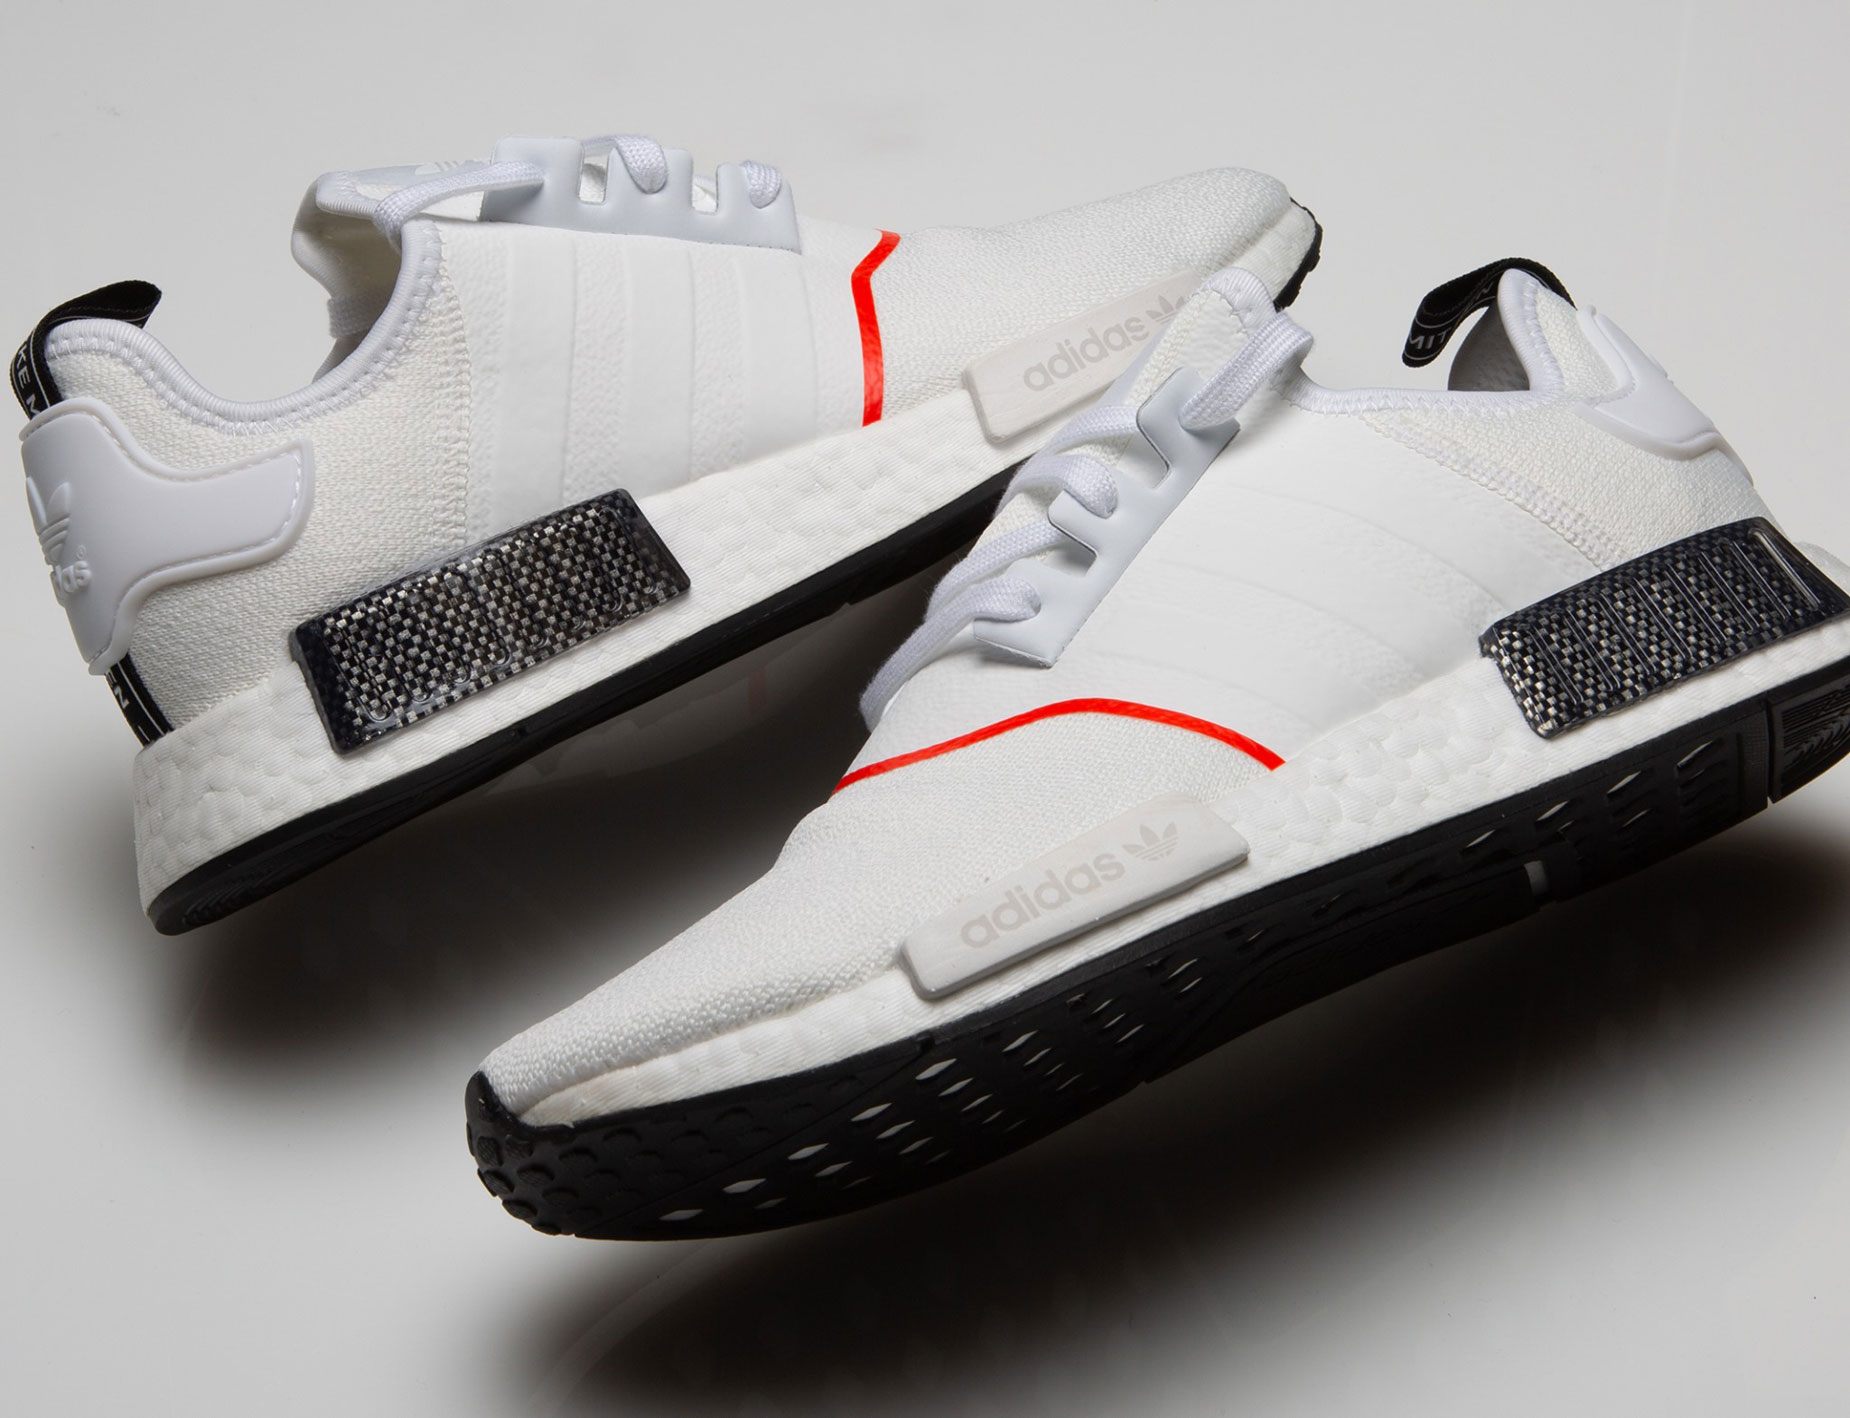 NMD R1 Popularity Recommendations for Web Shooting and PTT 2020